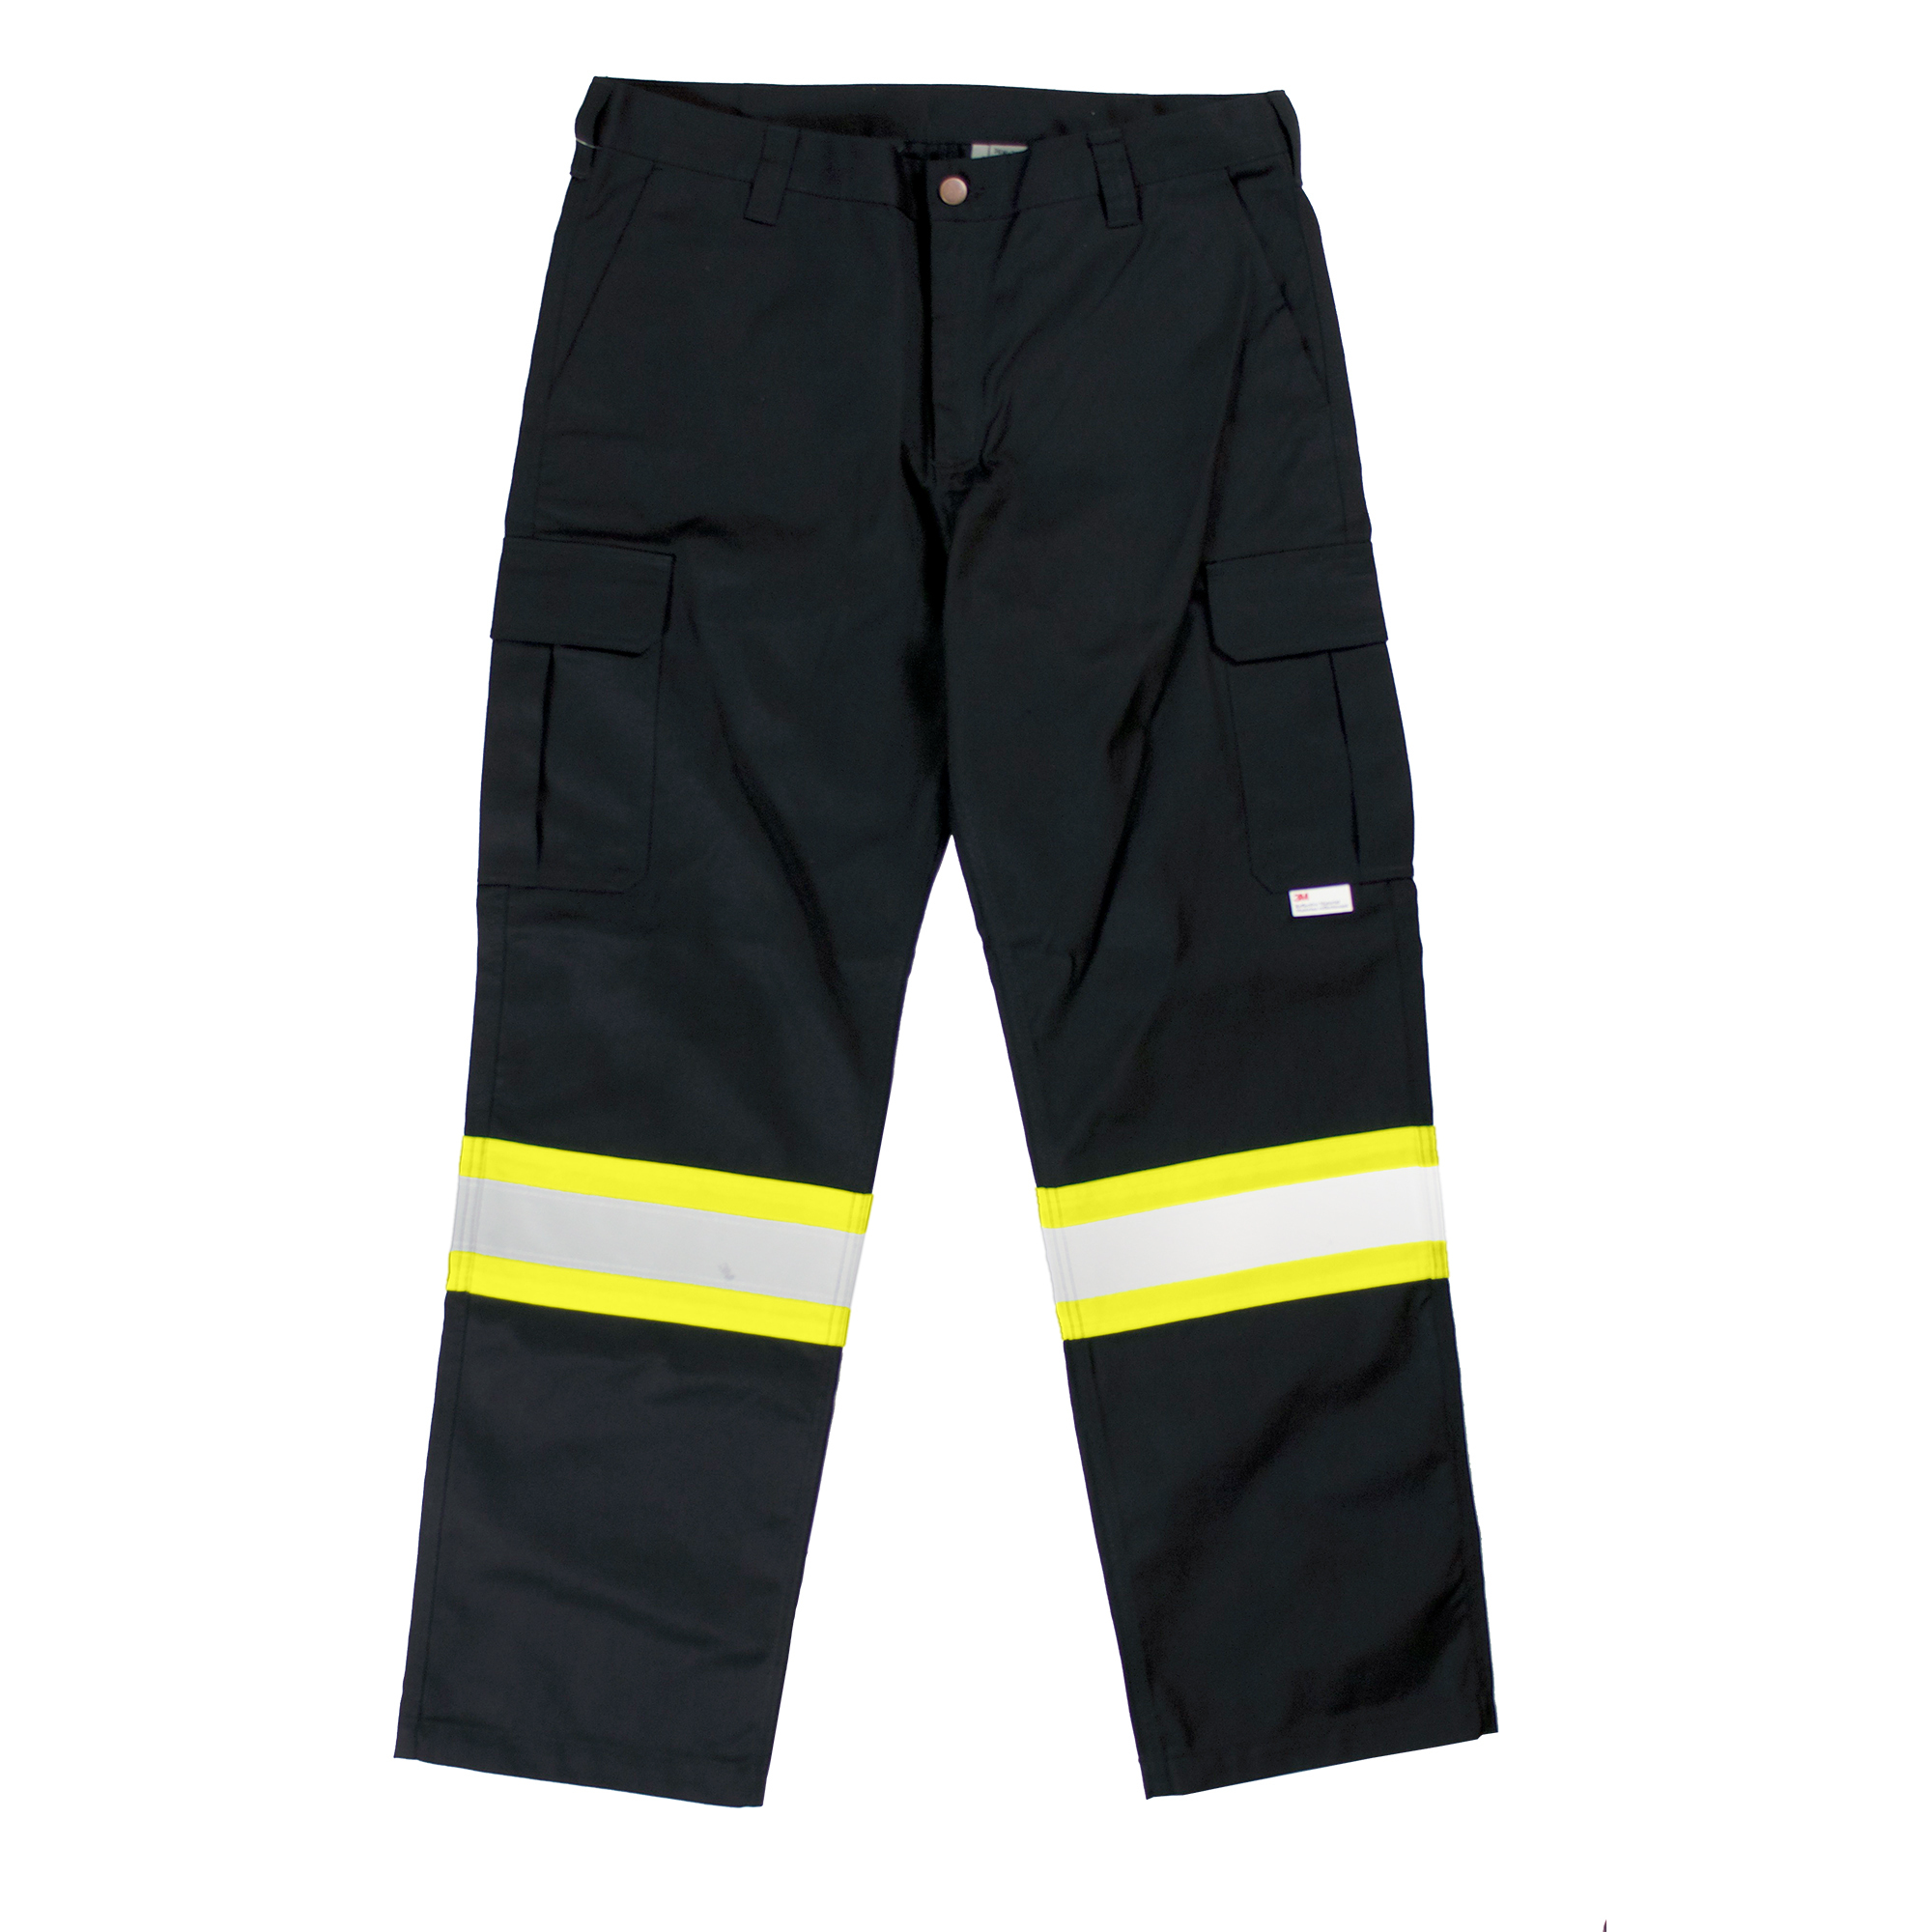 Tough Duck, Safety Cargo Utility Pant, Waist 32 in, Inseam 30 in, Color Black, Model S60701